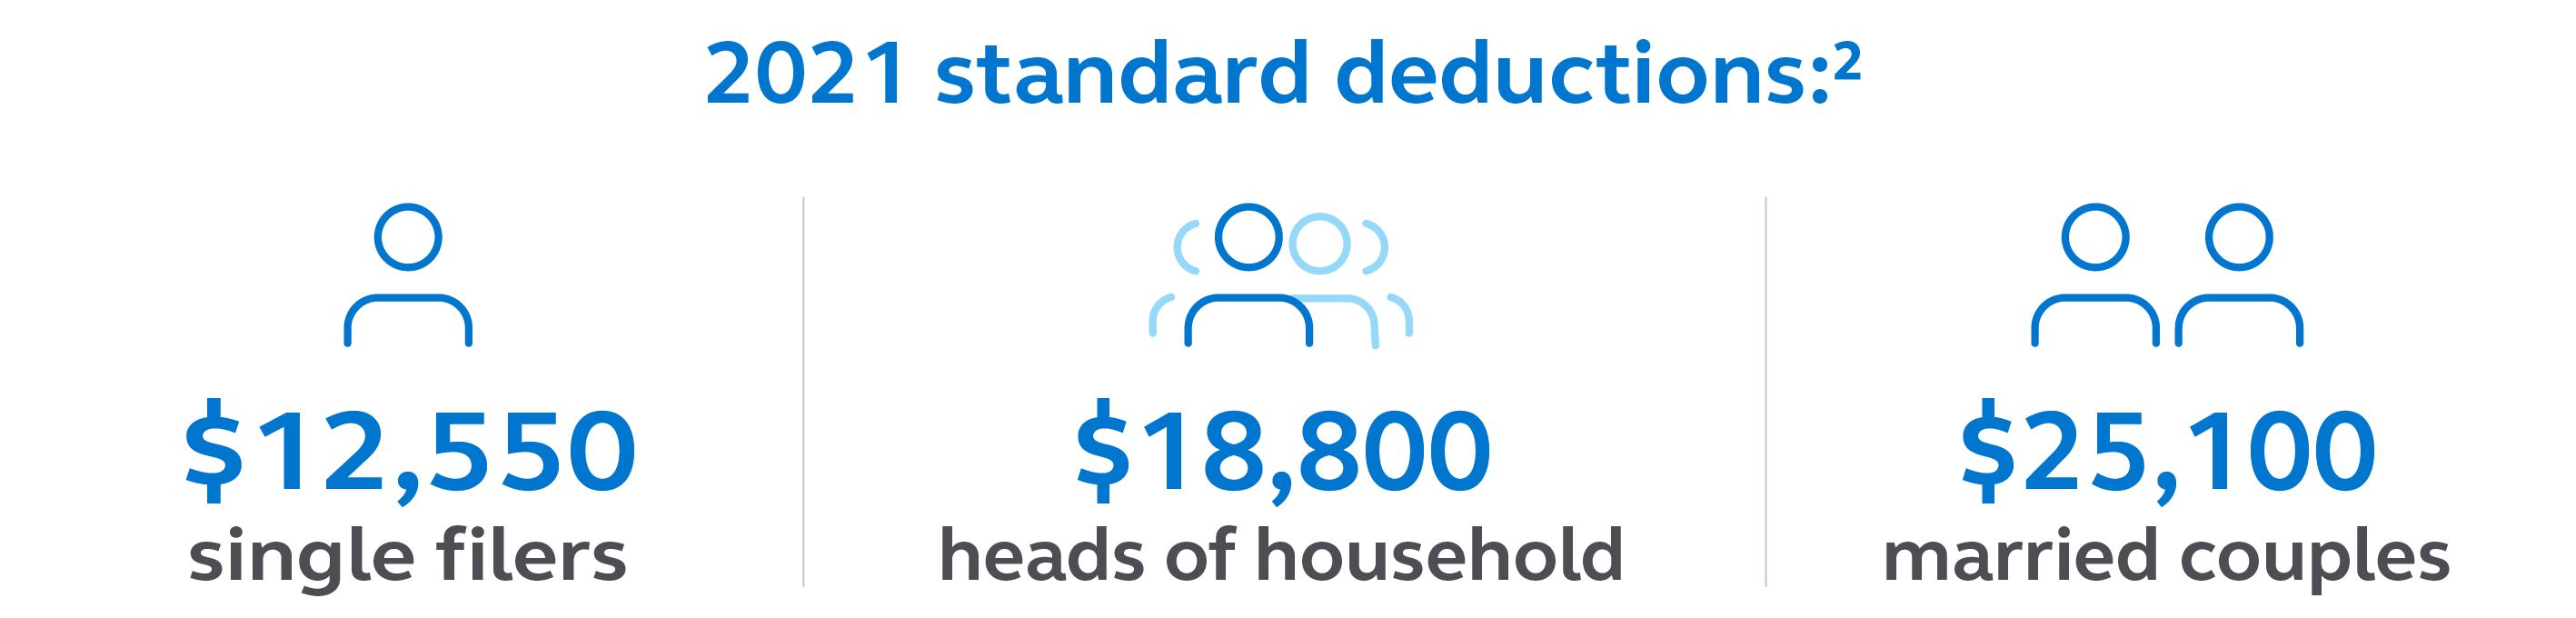 Illustration showing standard 2021 deductions: $12,550 single filers, $18,800 heads of household, $25,100 married couples.